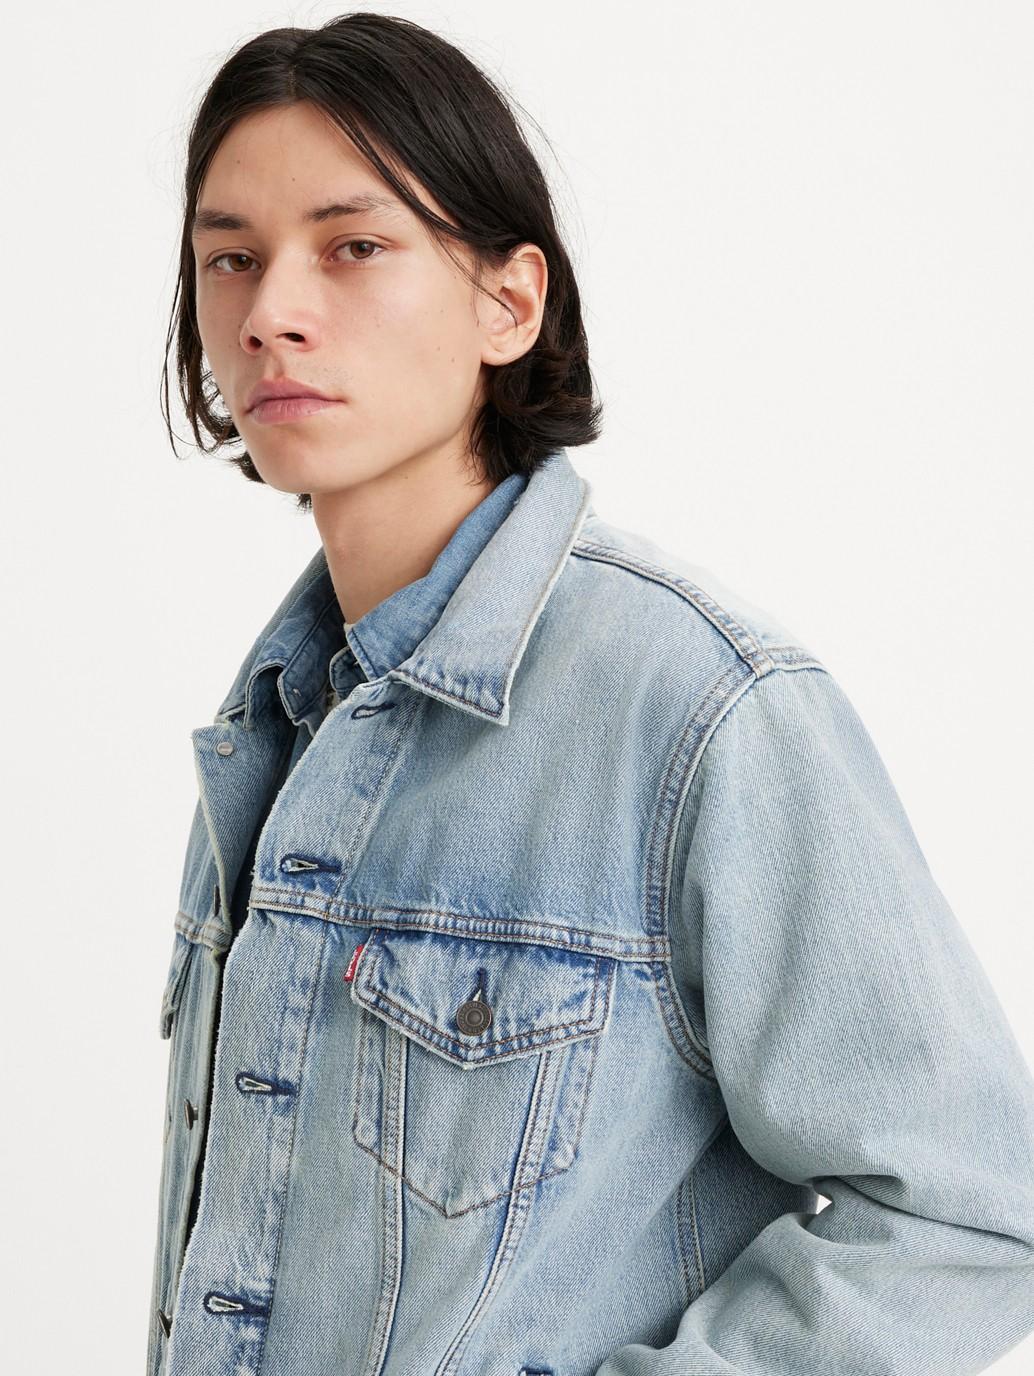 Buy Levi's® Men's Relaxed Fit Trucker Jacket| Levi's® Official Online ...